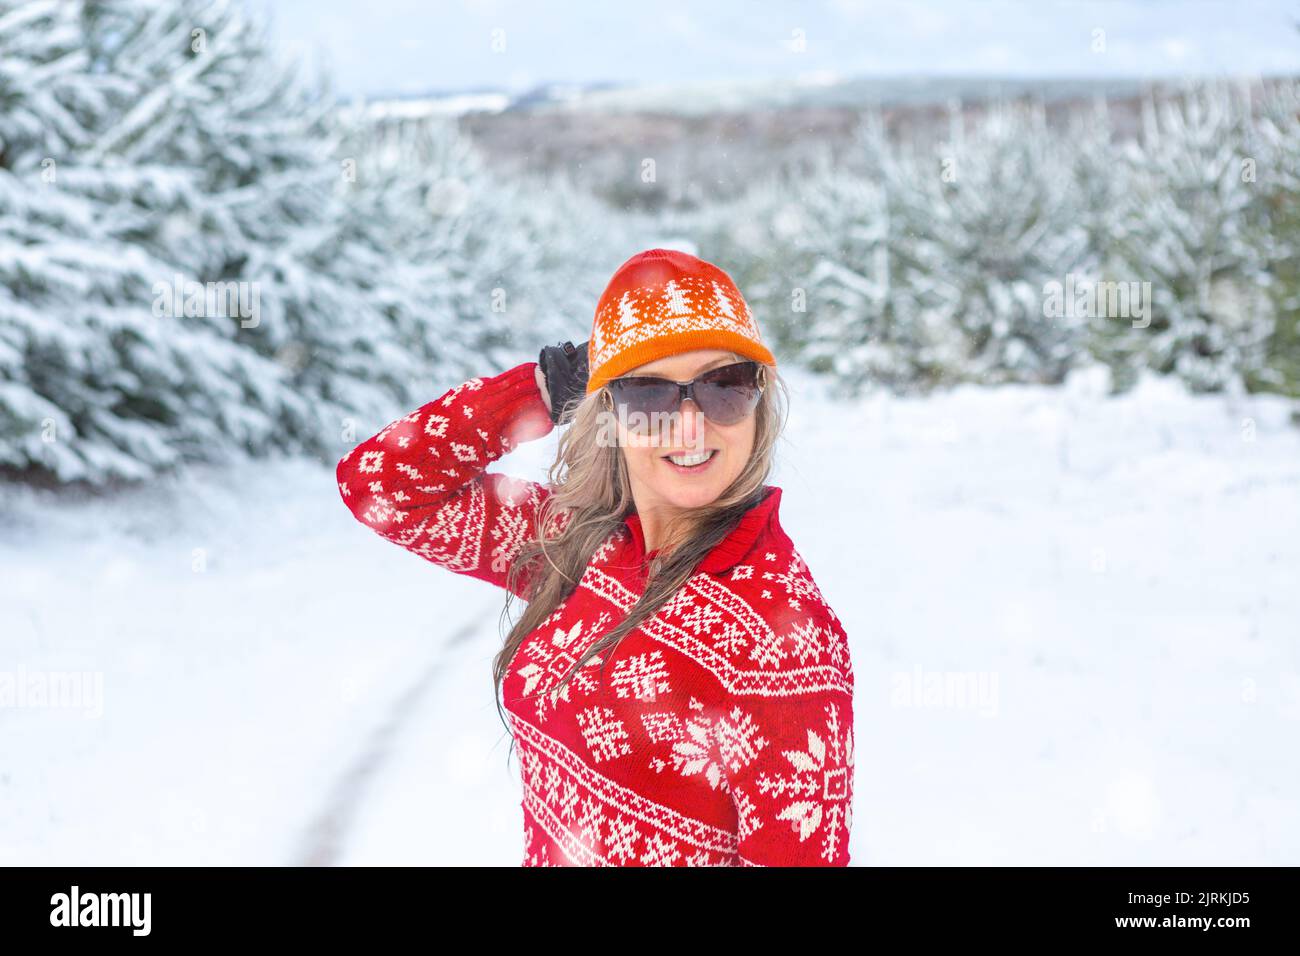 Happy woman enjoying the snow covered landscape in Australia during winter Stock Photo